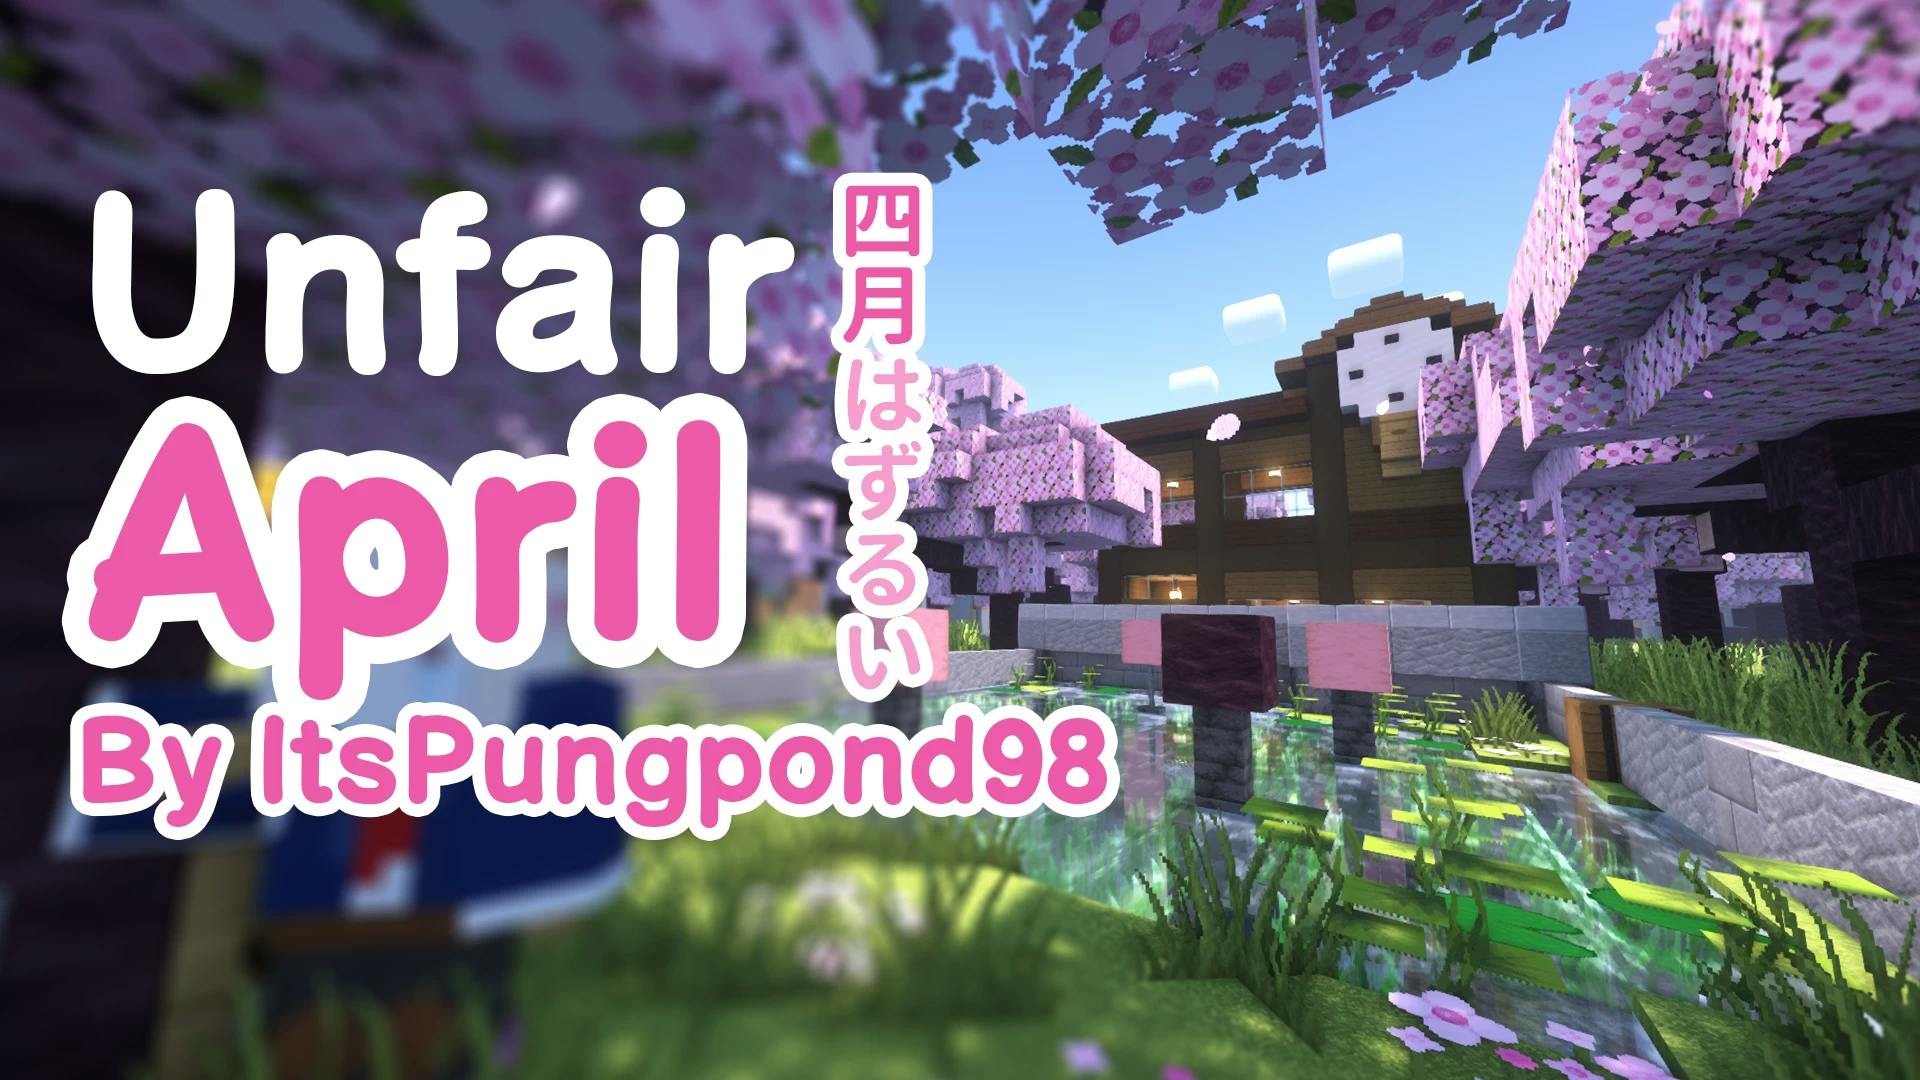 The logo for Unfair April, a Minecraft Map for 1.20.4 by ItsPungpond98